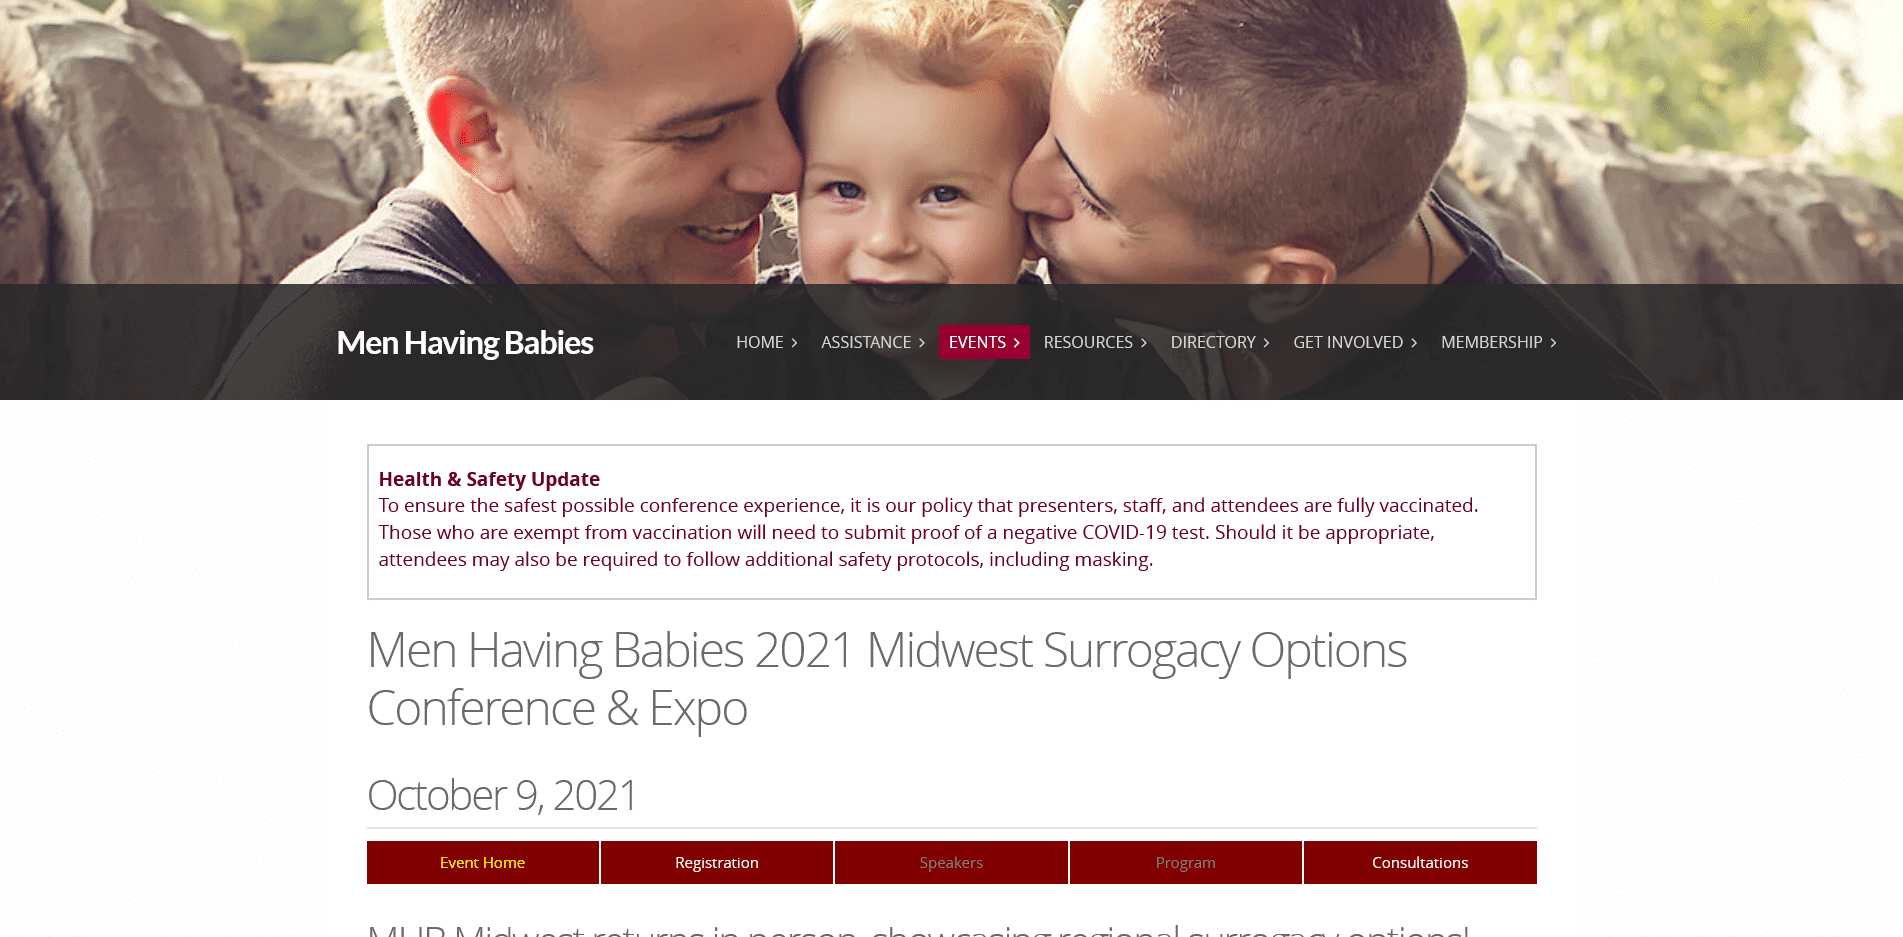 men having babies 2021 midwest surrogacy options conference & expo